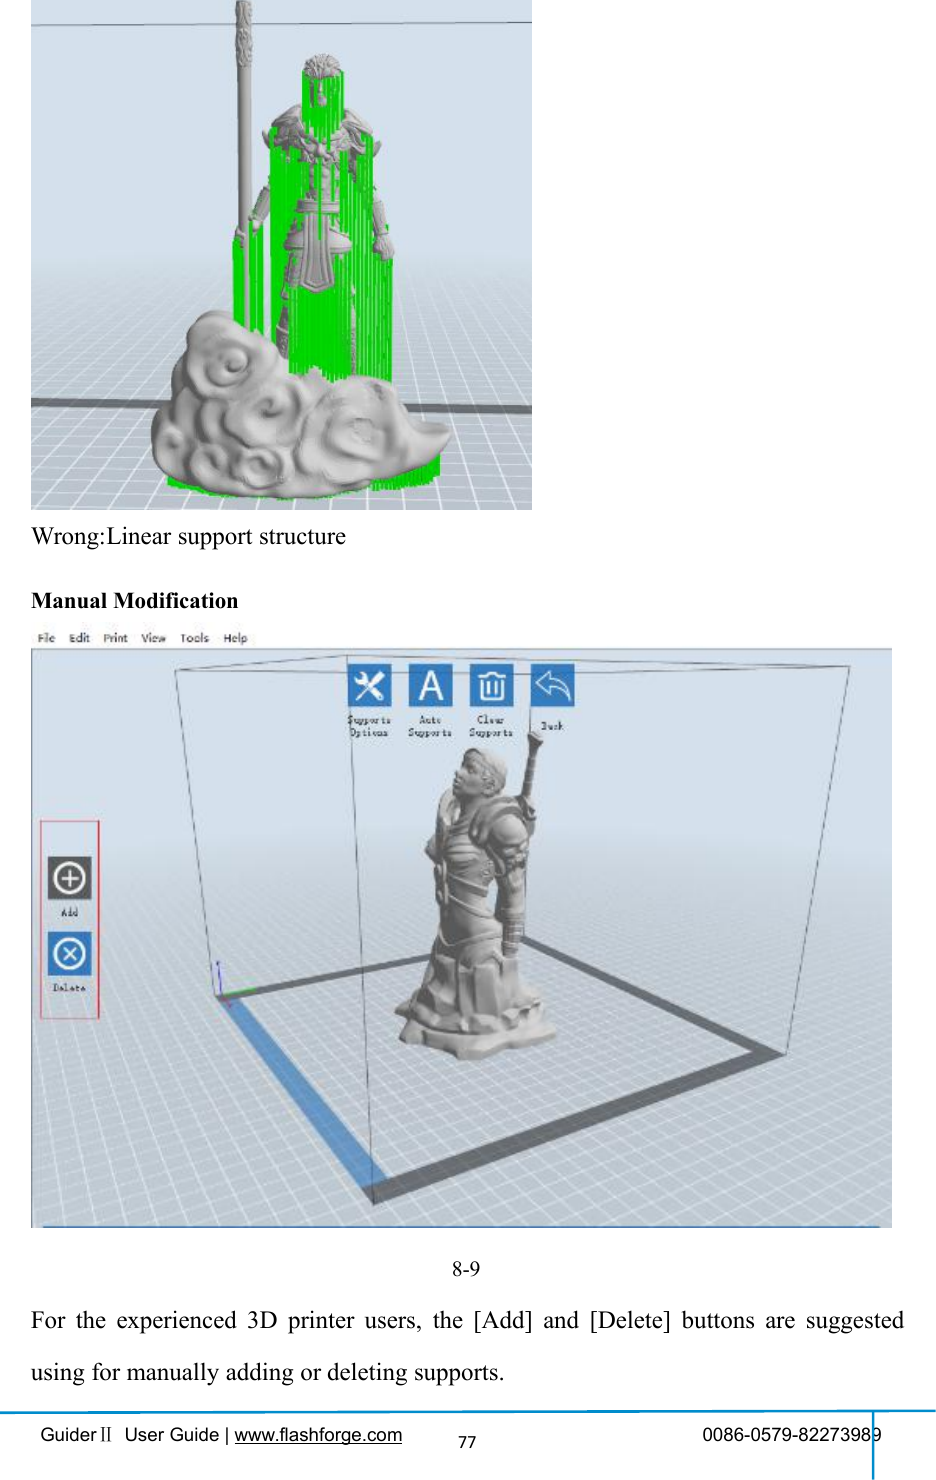 GuiderⅡUser Guide | www.flashforge.com 0086-0579-8227398977Wrong:Linear support structureManual Modification8-9For the experienced 3D printer users, the [Add] and [Delete] buttons are suggestedusing for manually adding or deleting supports.